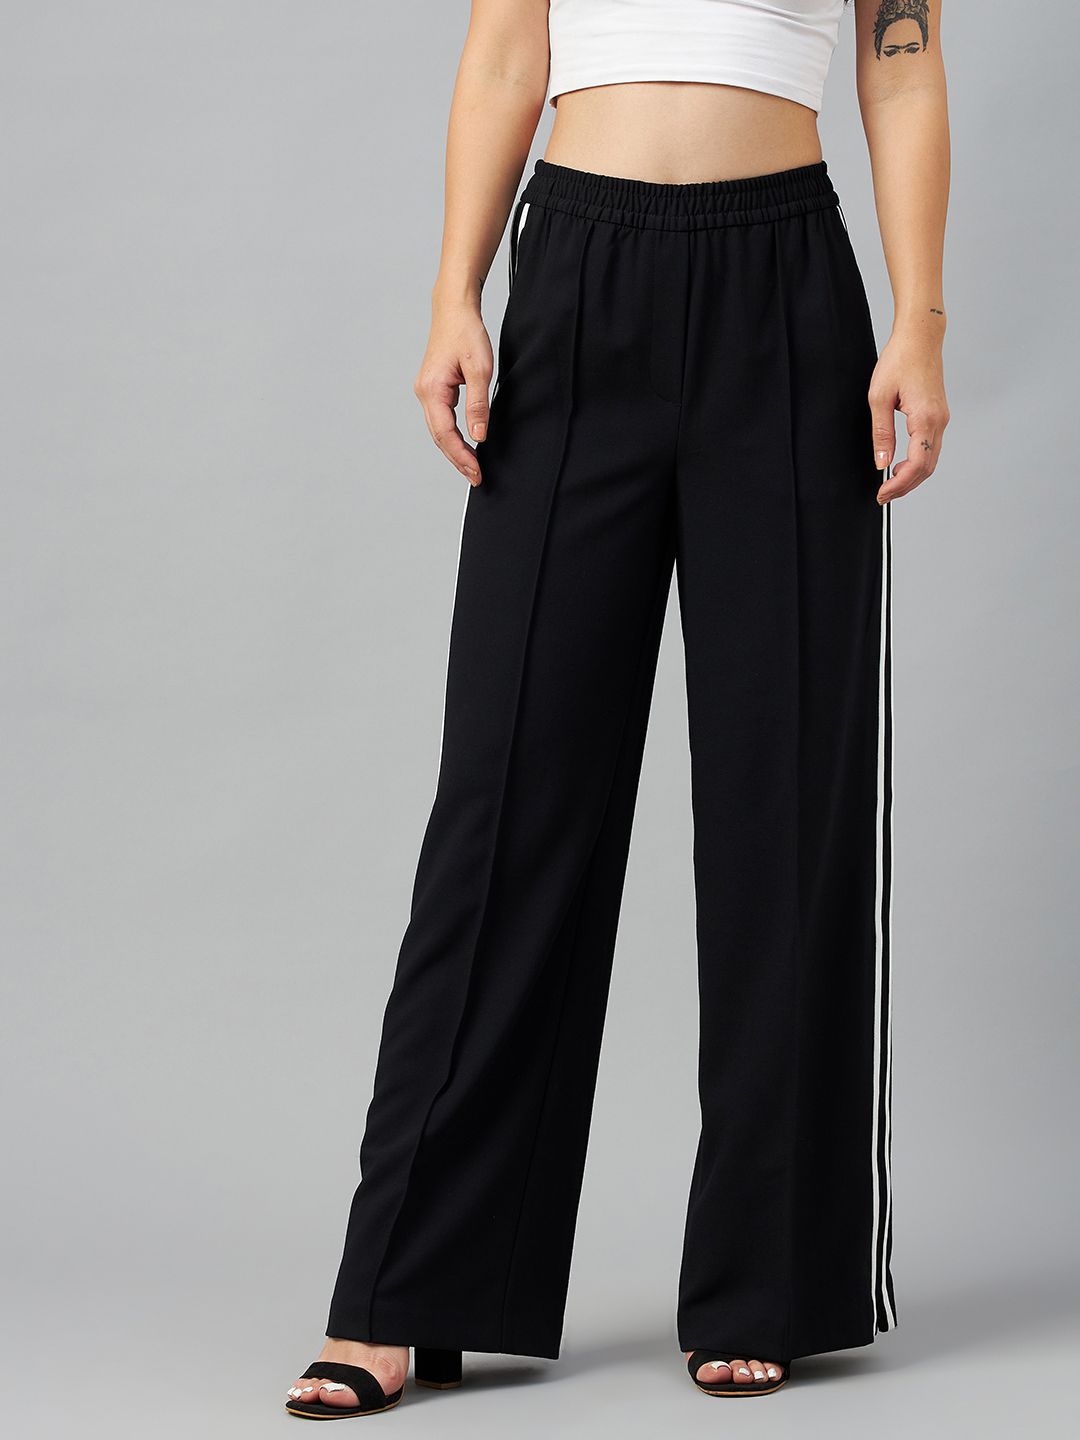 Marks & Spencer Women Black High-Rise Trousers Price in India